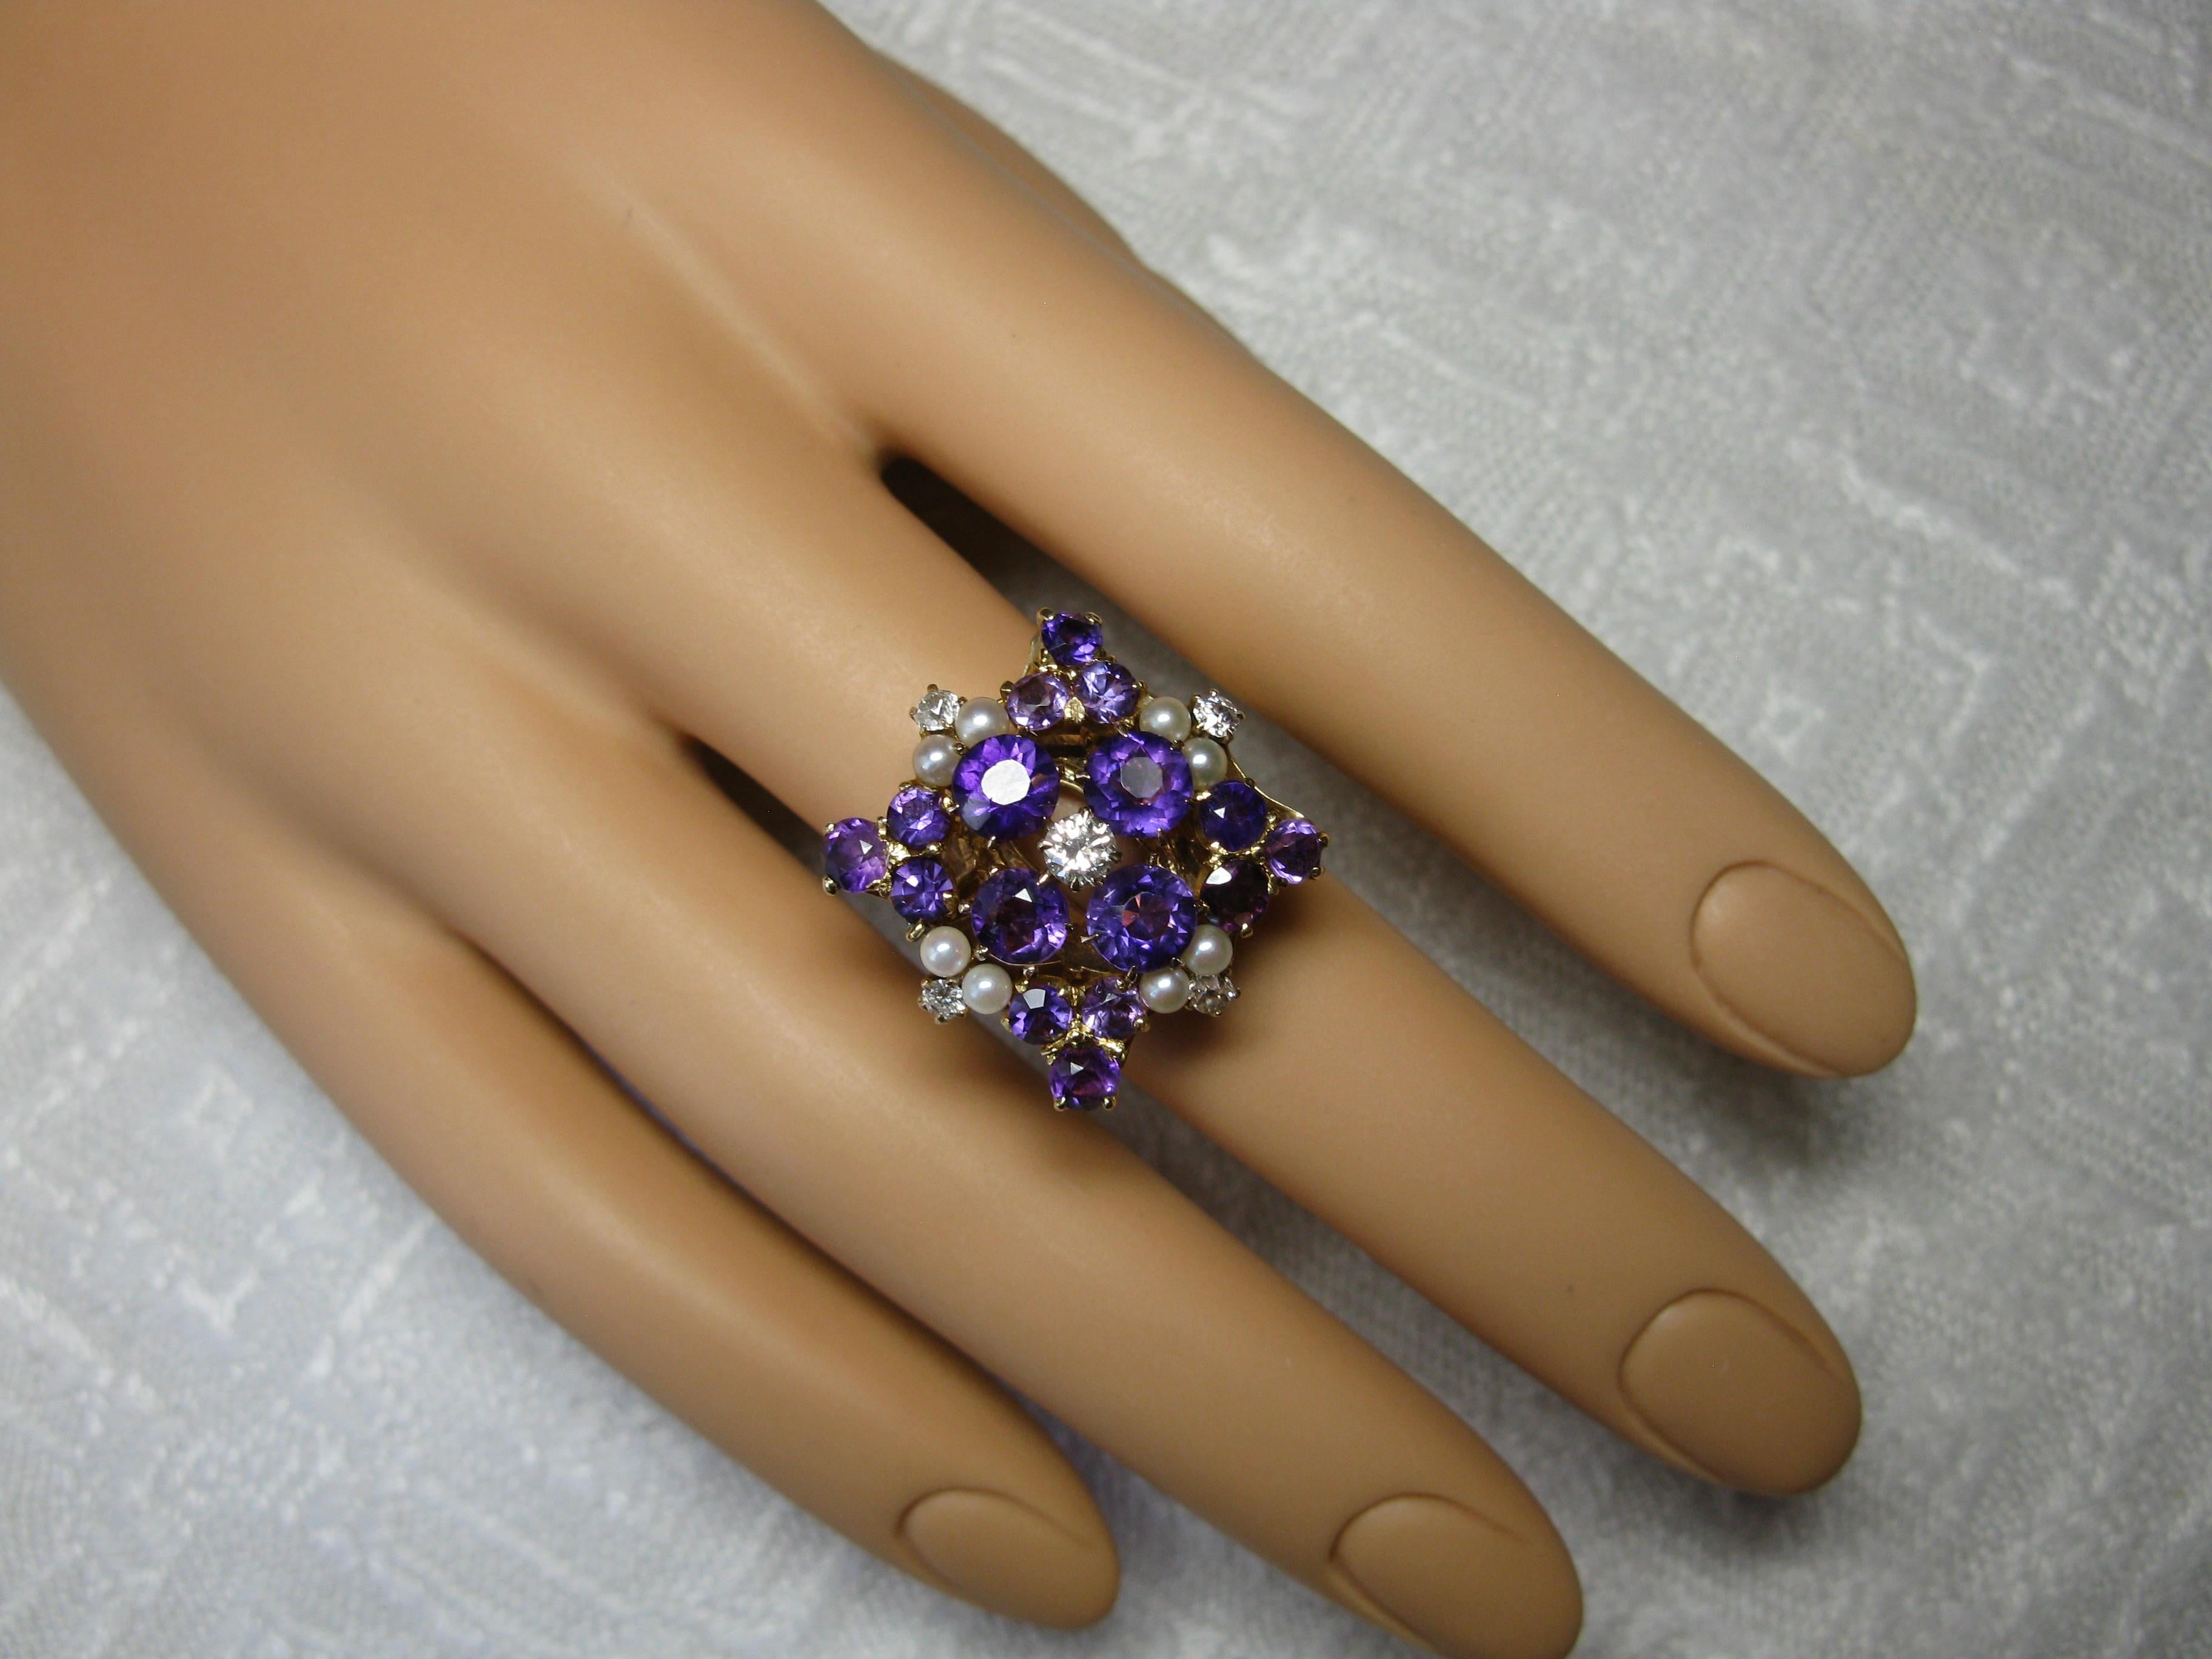 THIS IS A SPECTACULAR RING FROM ONE OF THE MOST PROMINENT ORIGINAL LOS ANGELES FAMILIES.  THE RING IS HIGHLIGHTED BY THE RADIANT ROUND FACETED SIBERIAN AMETHYSTS - THE COLOR OF THESE JEWELS IS EXTRAORDINARY!   THEN THERE ARE THE DIAMONDS - OF THE